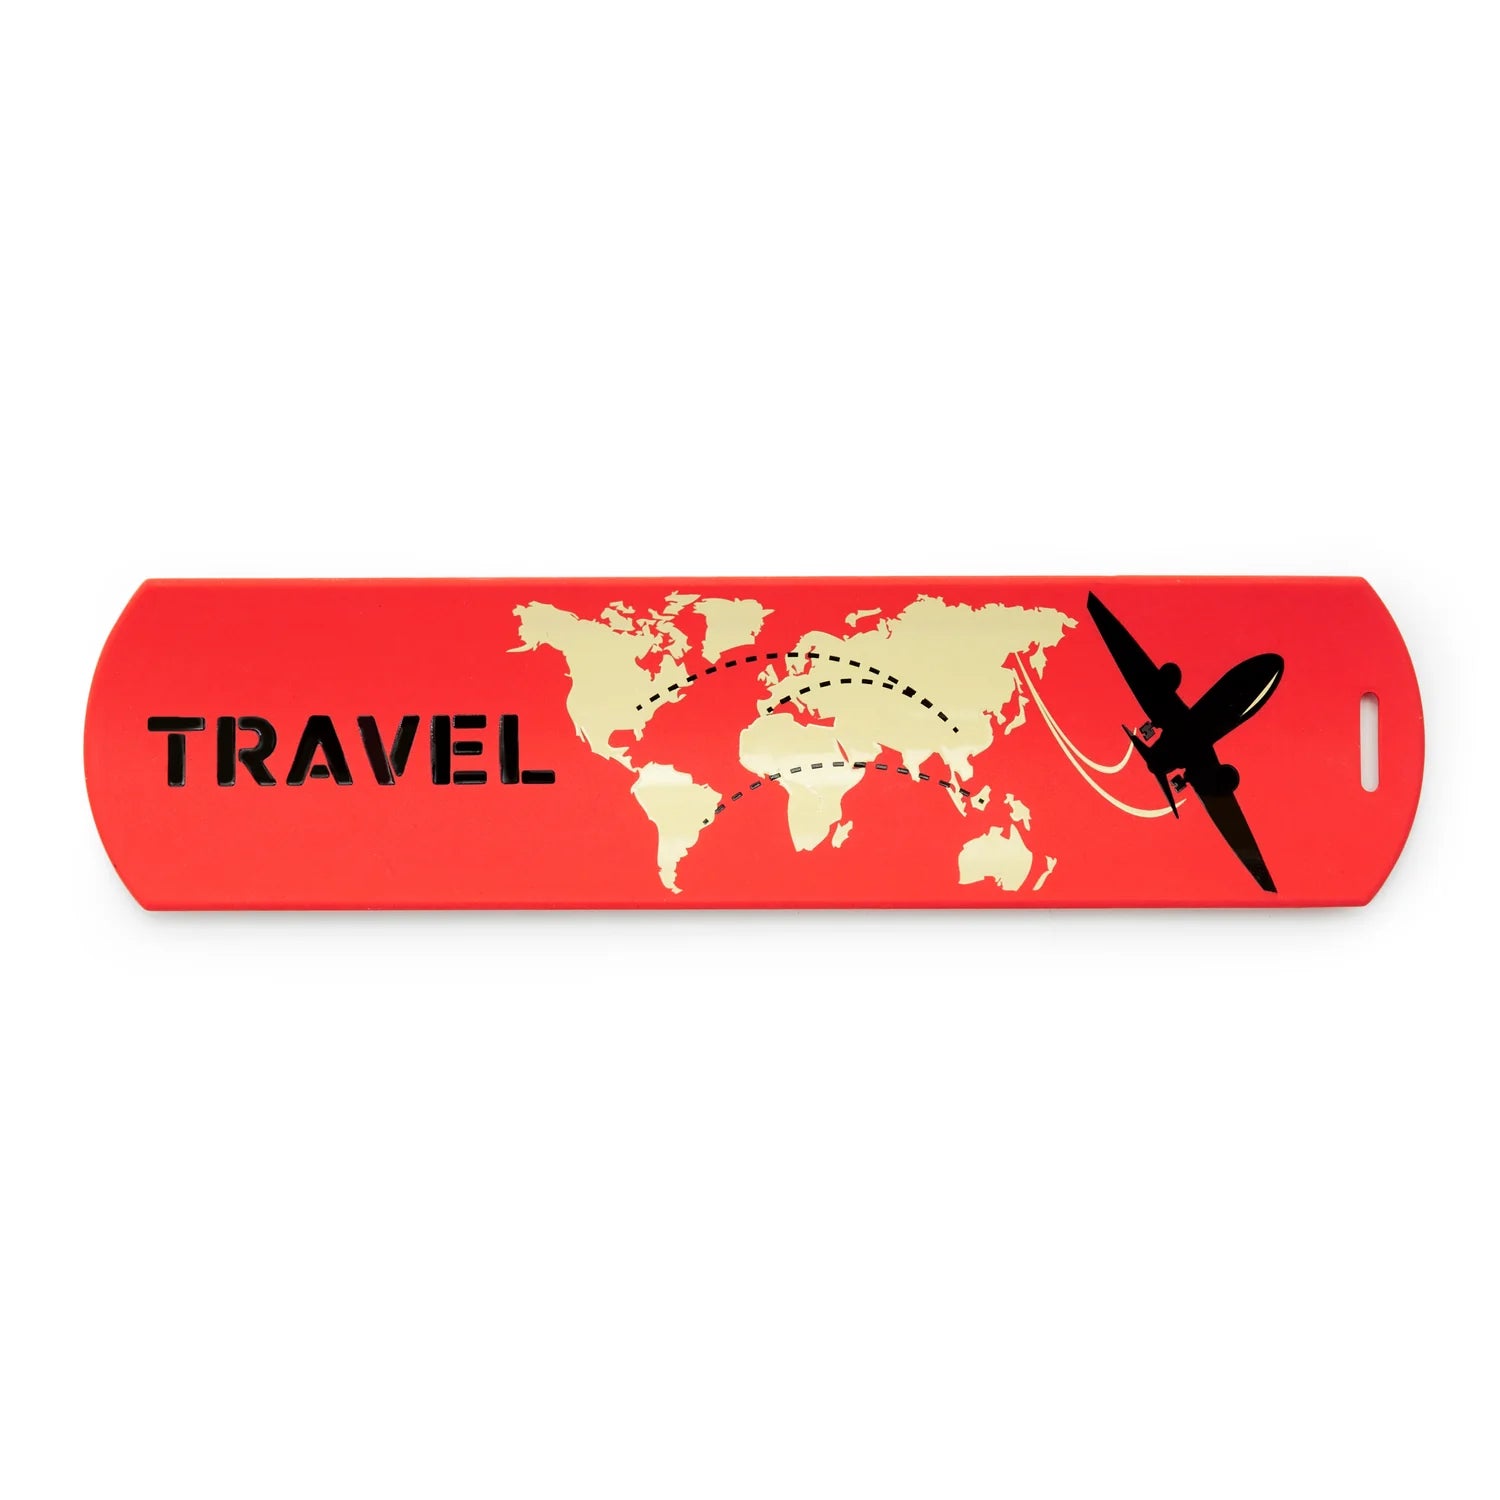 Fabulous Gifts Kikkerland Red Slap Luggage Tag by Weirs of Baggot Street